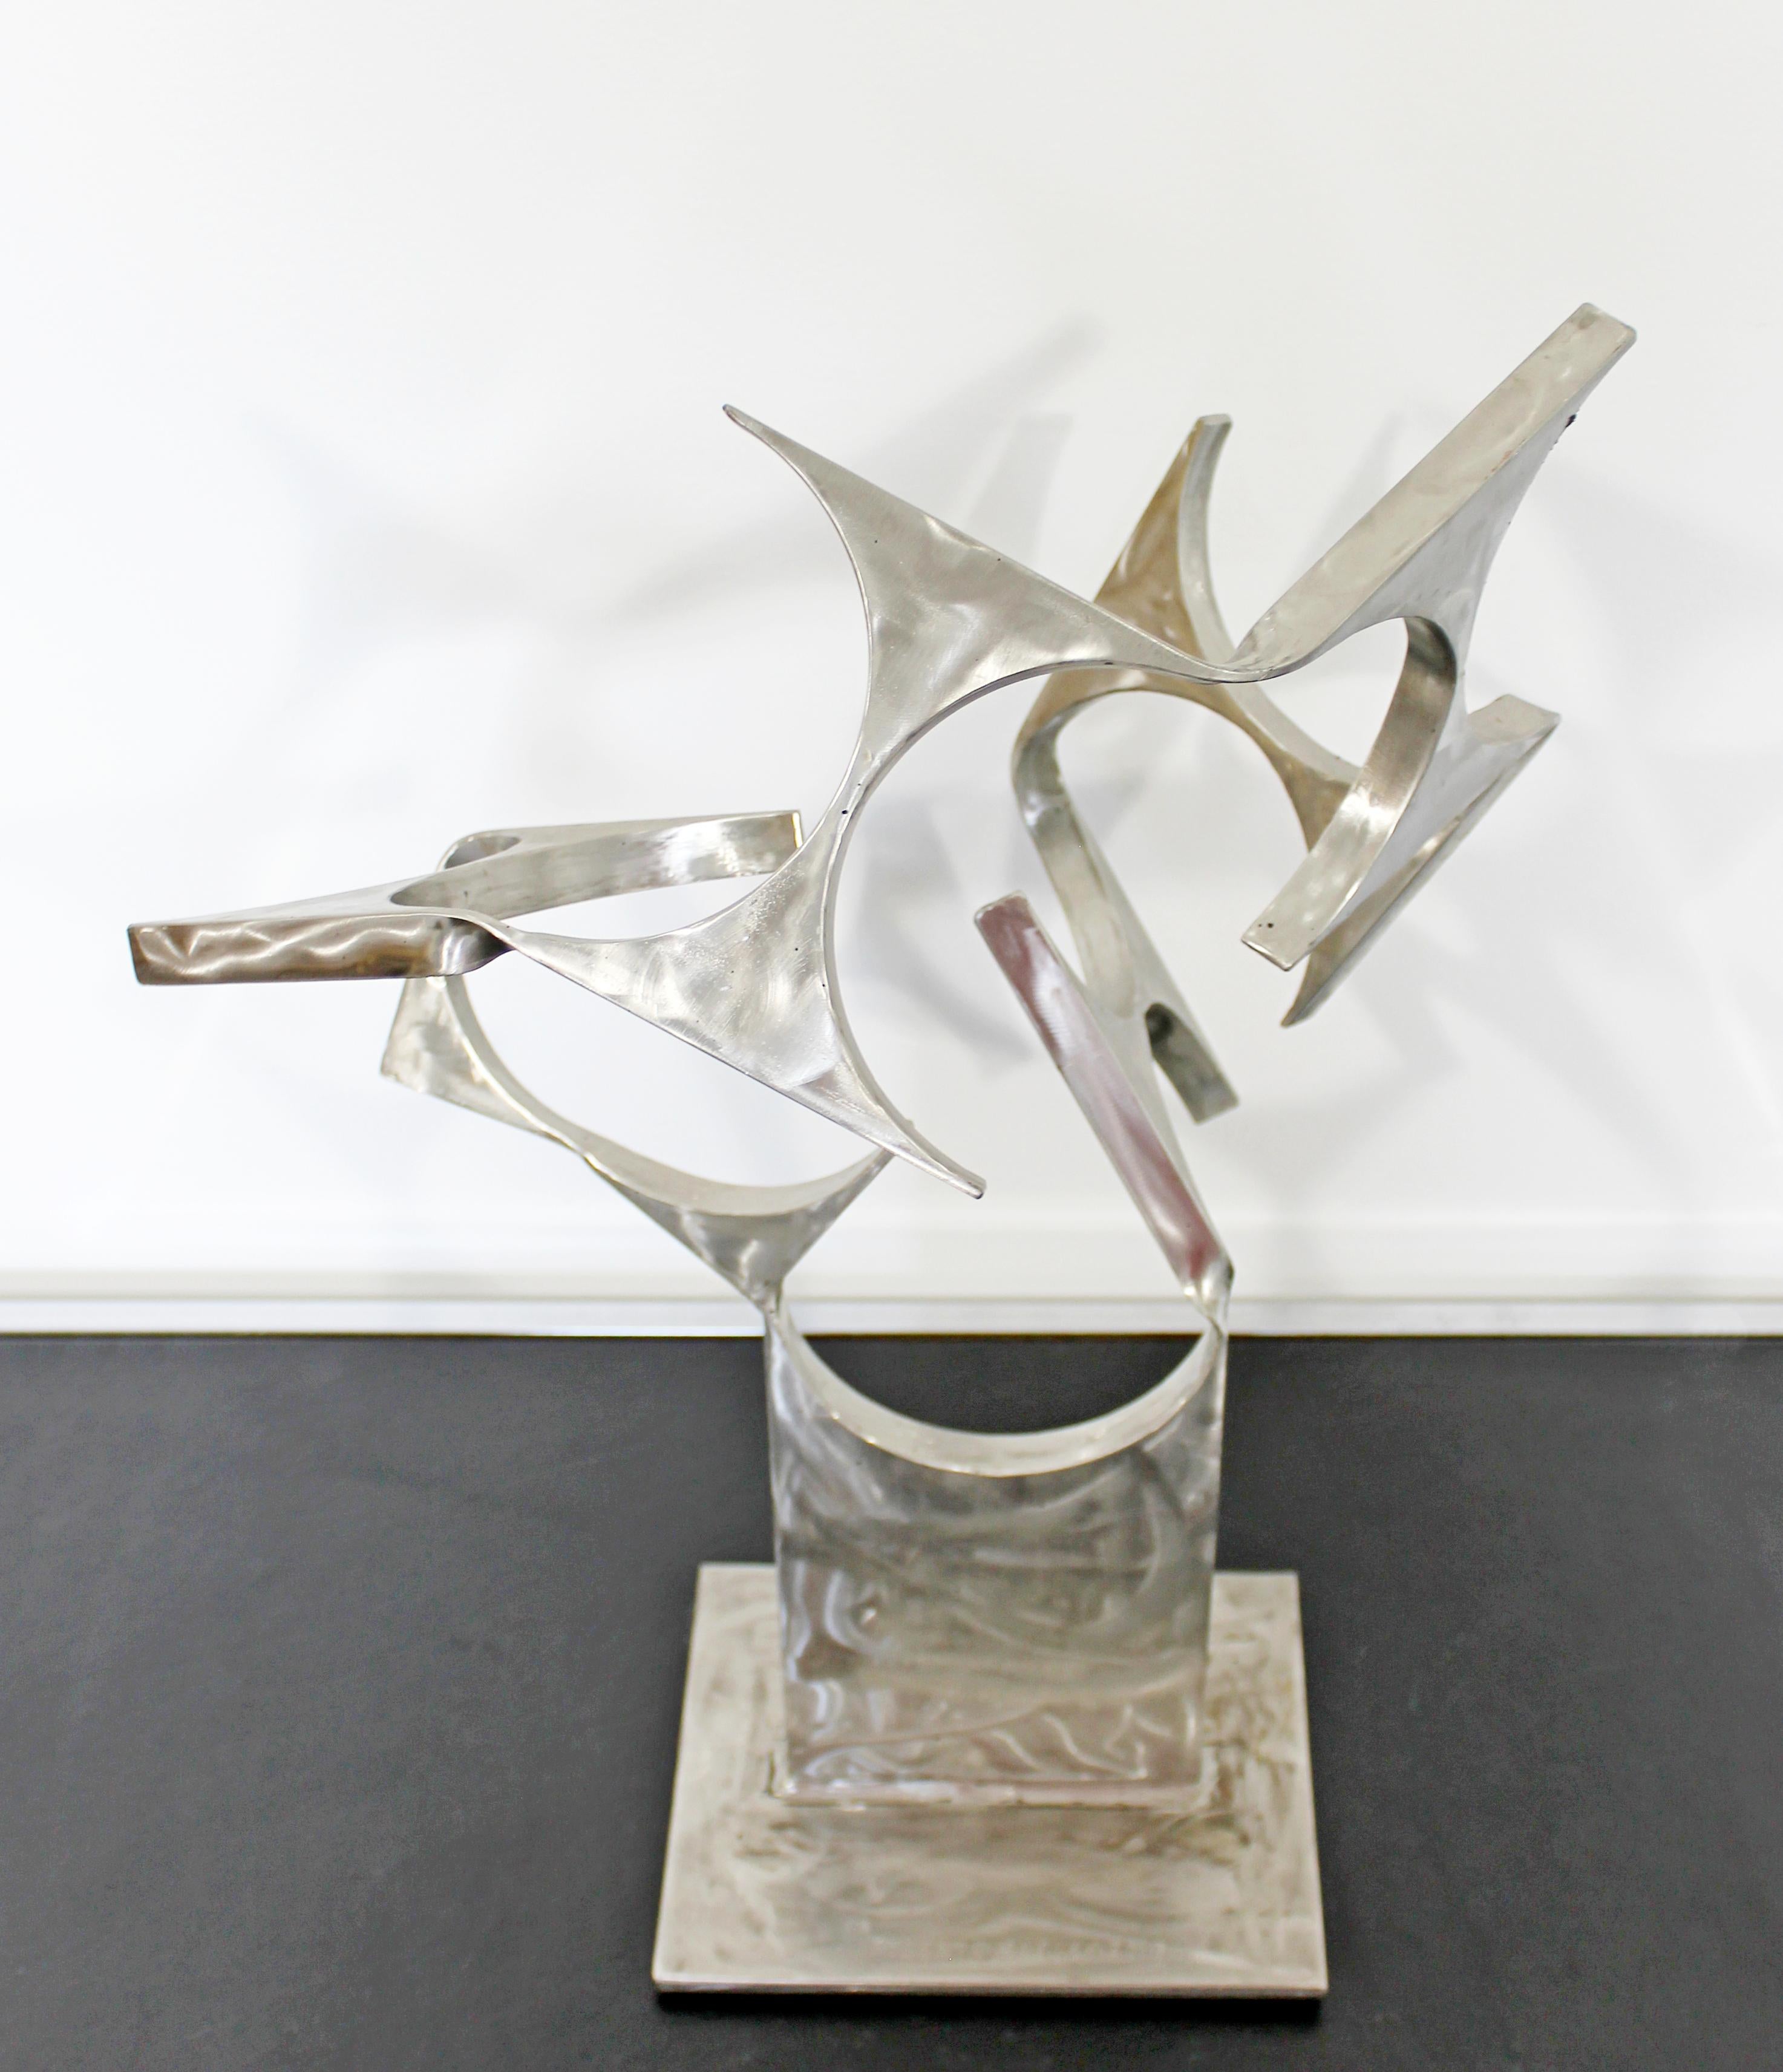 For your consideration is a modernist, abstract, stainless steel table sculpture, signed Robert D. Hansen, dated 2016. In excellent condition. The dimensions are 15